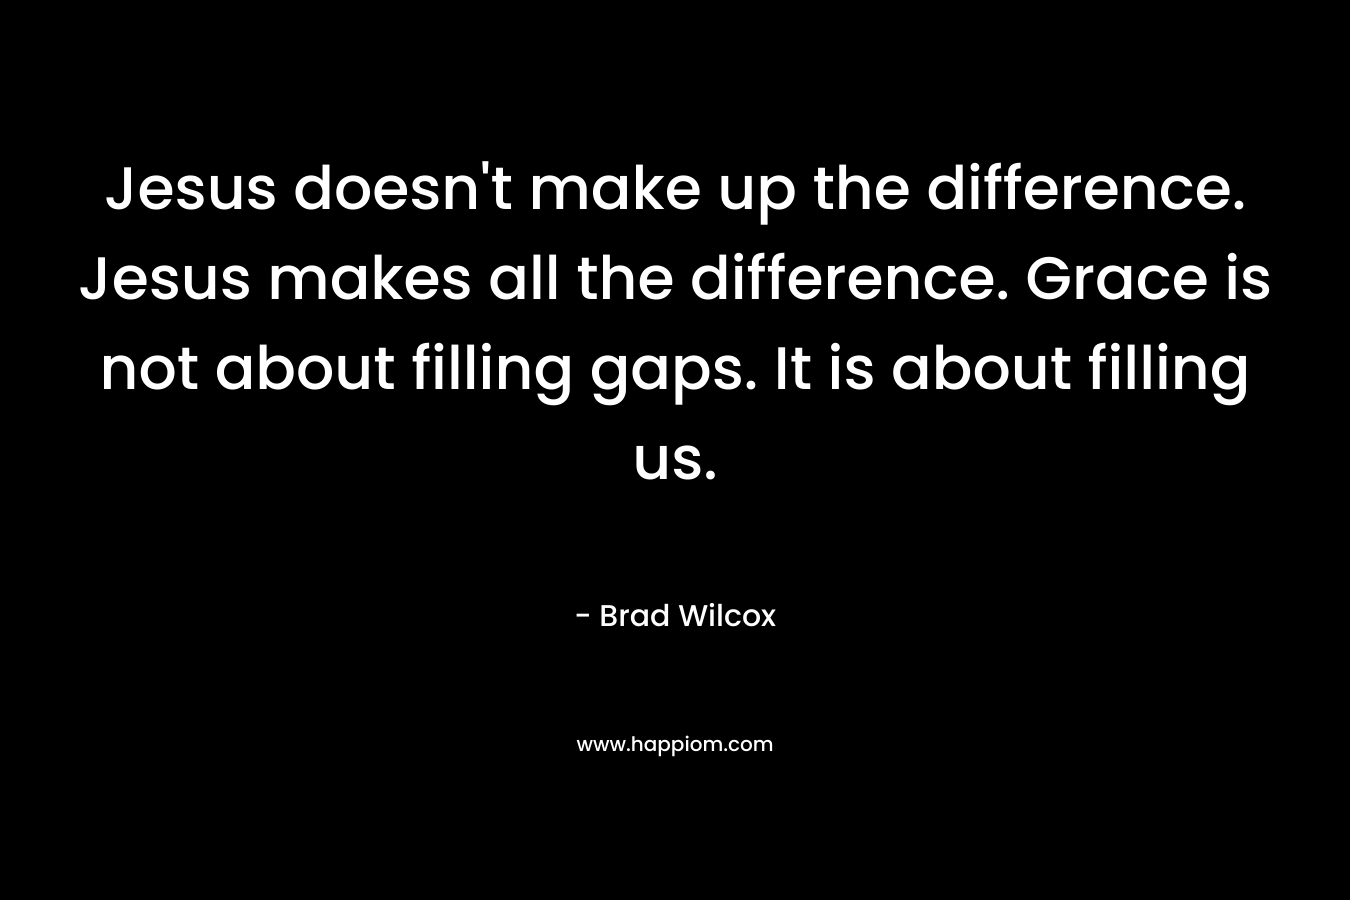 Jesus doesn’t make up the difference. Jesus makes all the difference. Grace is not about filling gaps. It is about filling us. – Brad Wilcox